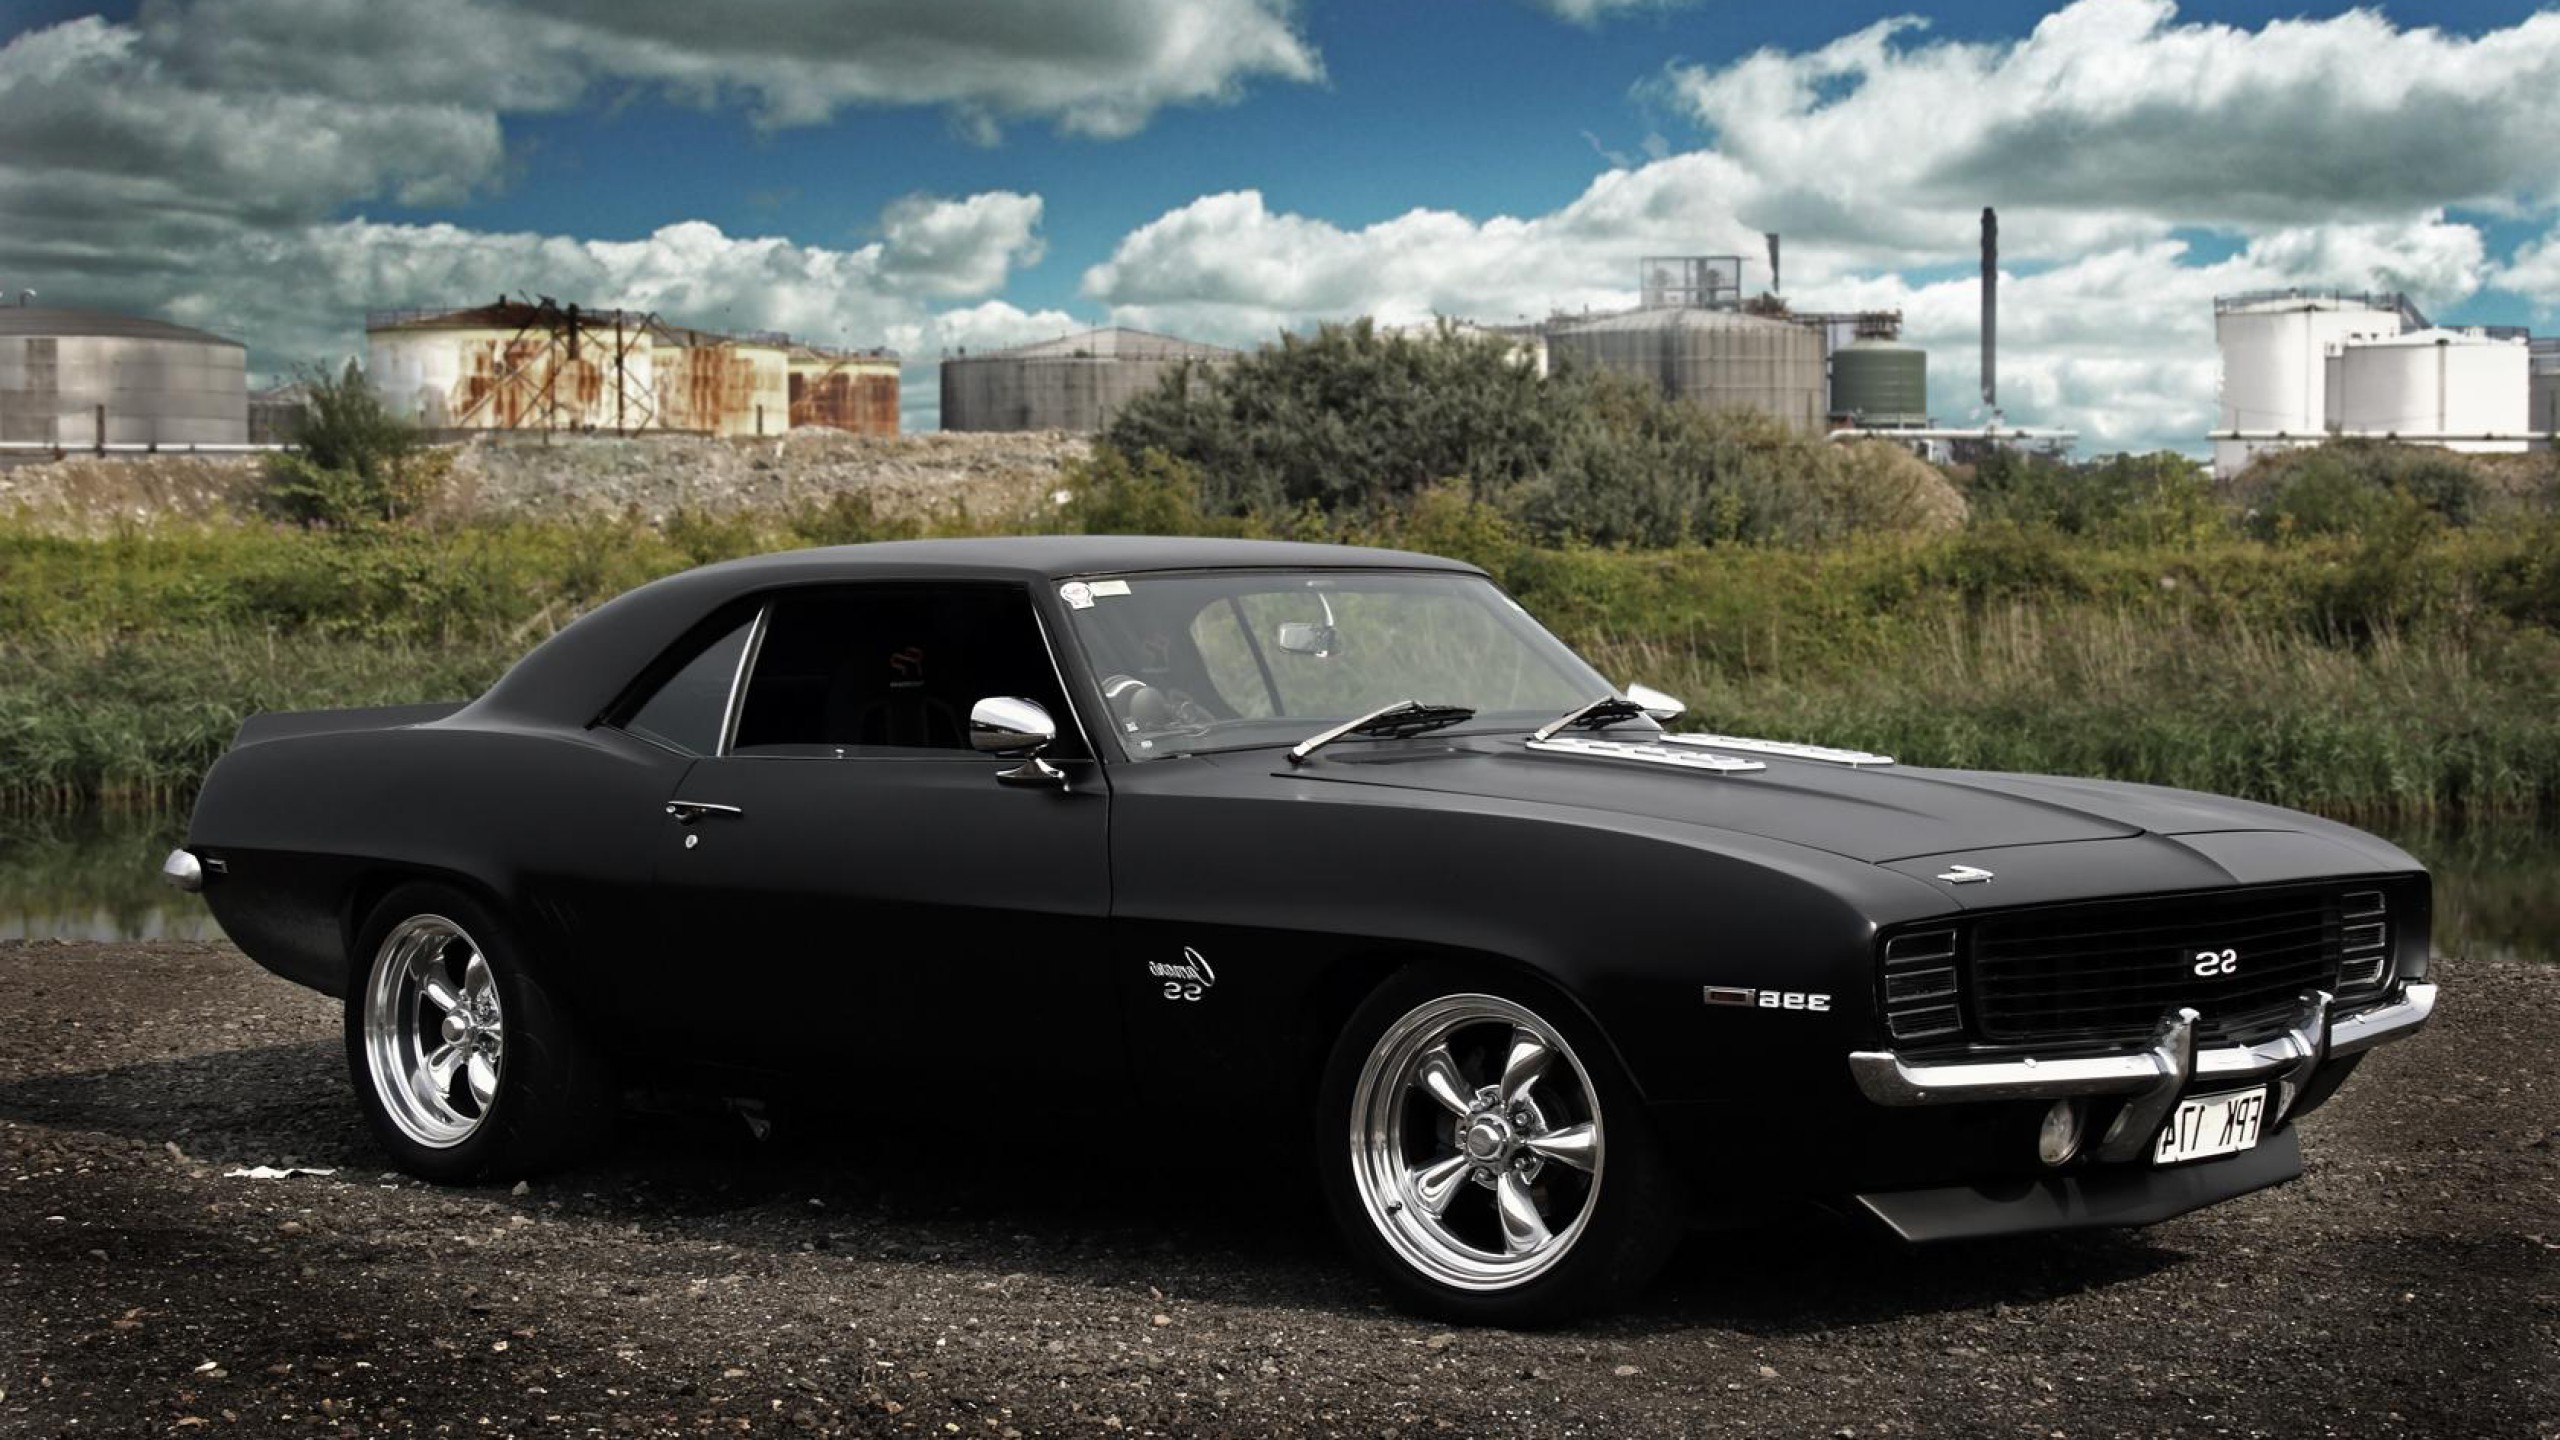 Muscle Car wallpaper ·① Download free amazing full HD wallpapers for ... Muscle Car Wallpaper 1920x1080